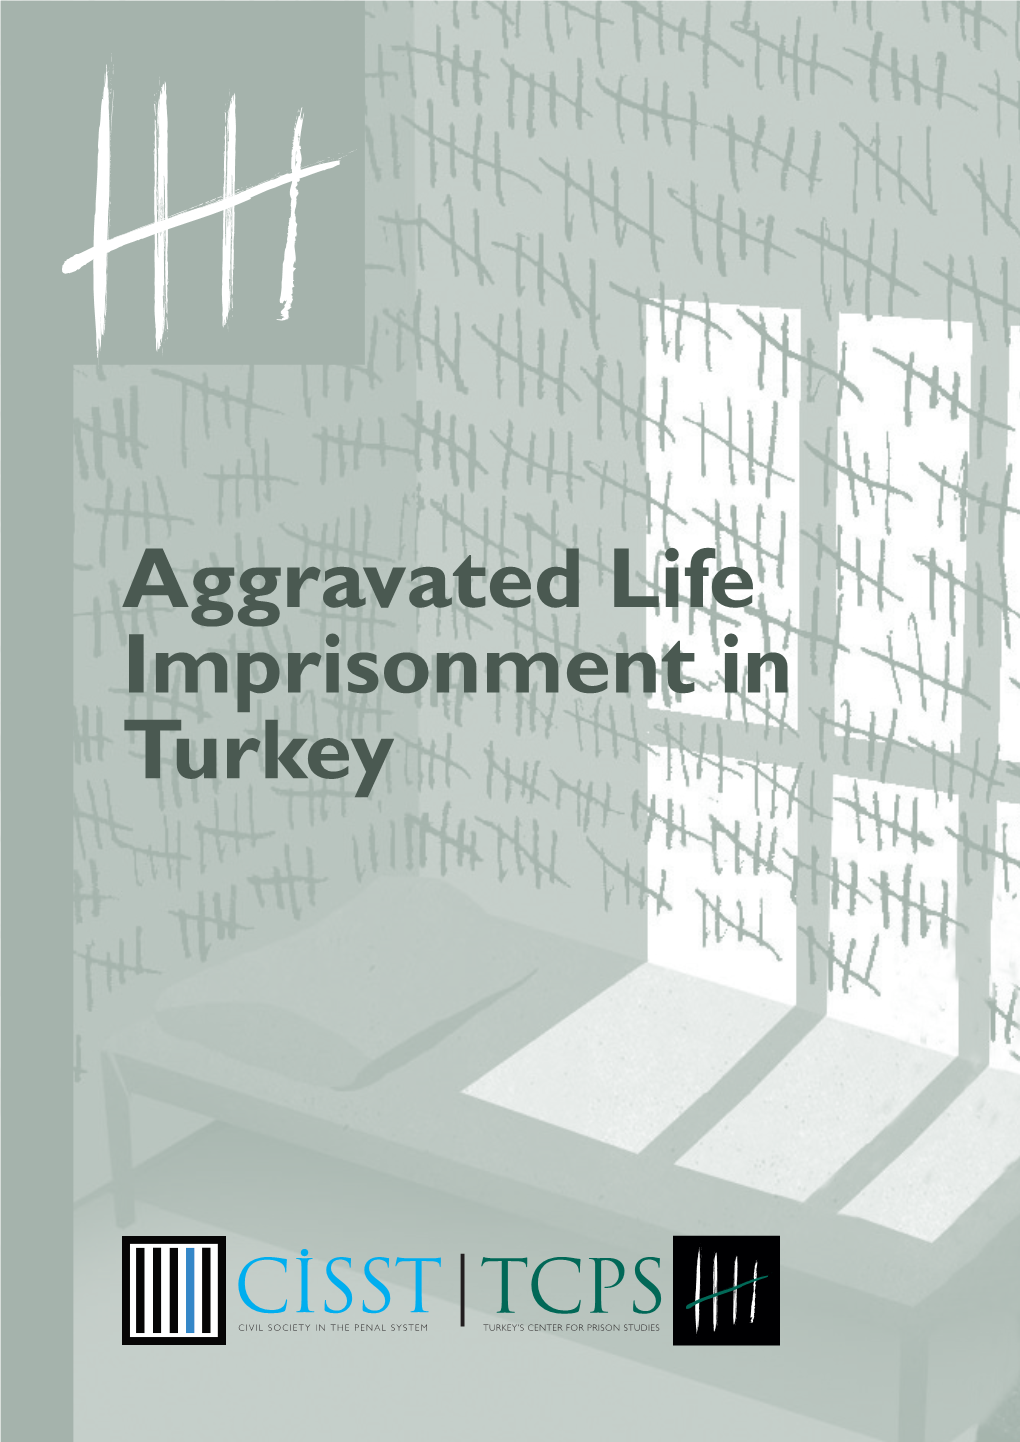 Aggravated Life Imprisonment in Turkey